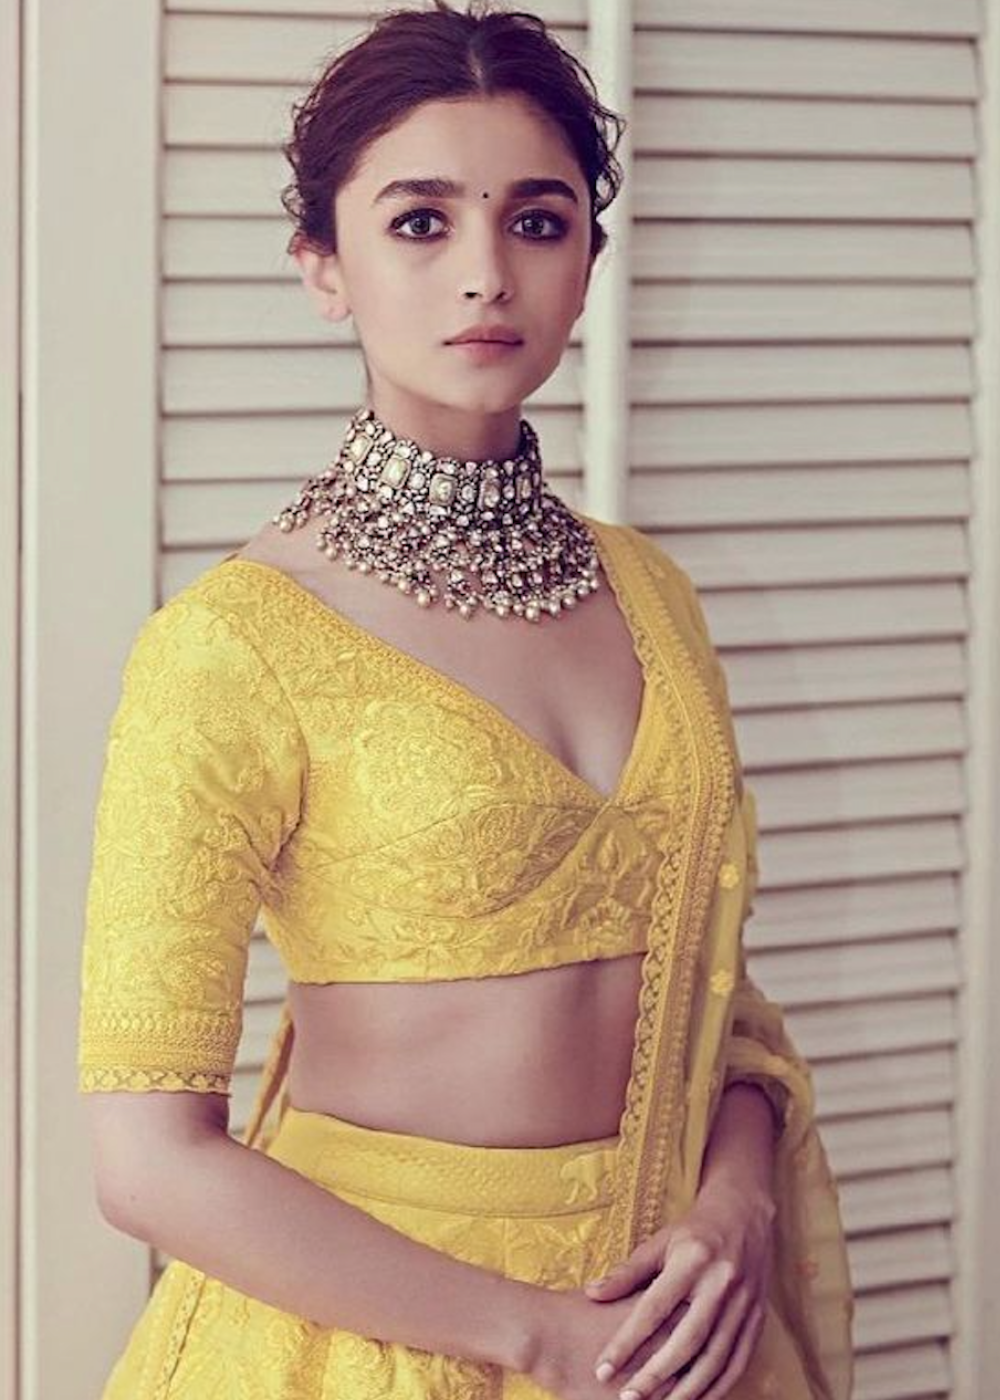 Bollywood actresses inspired ways to style bralette with saree